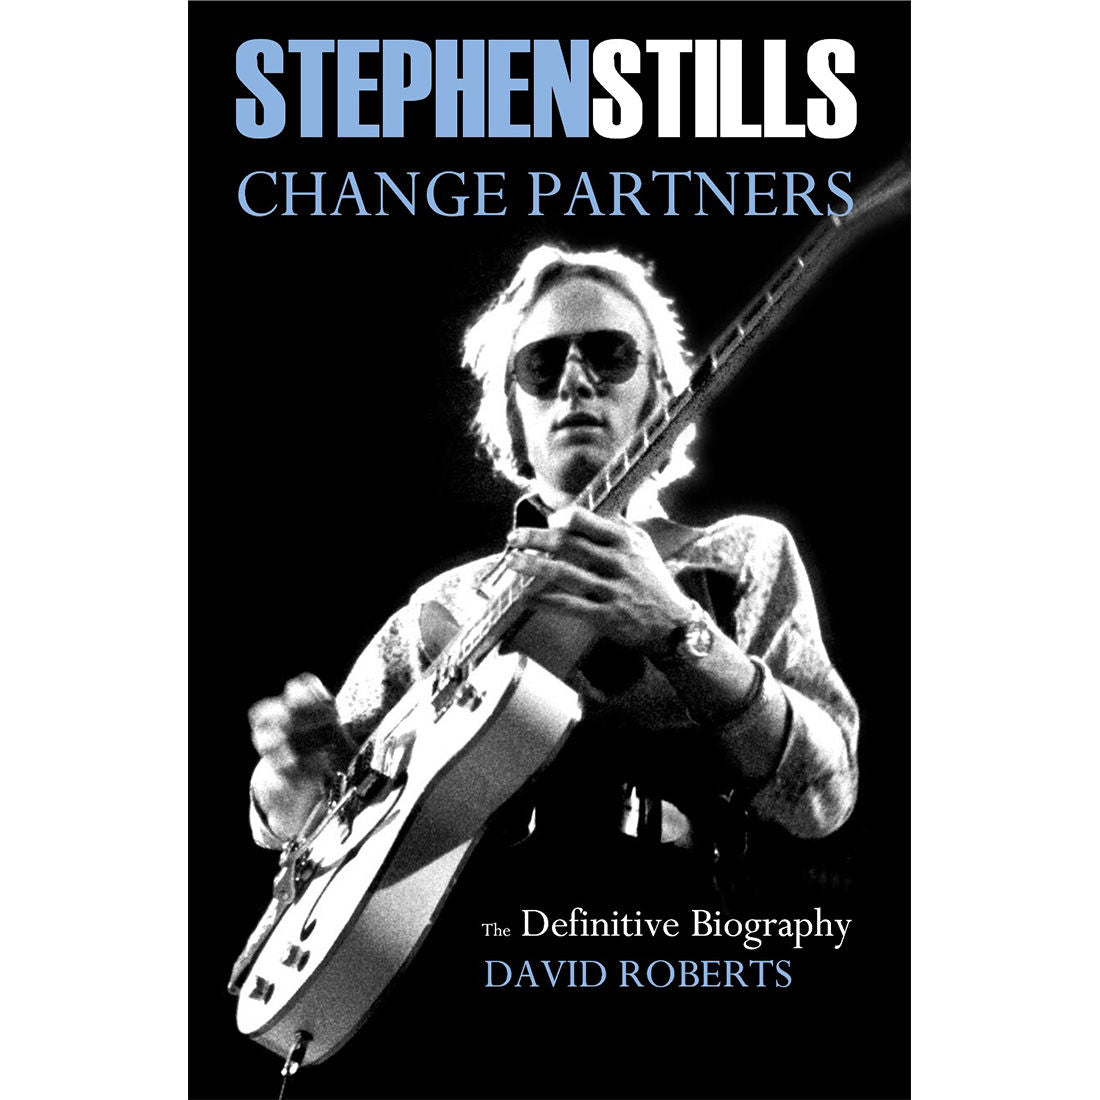 This Day In Music - Stephen Stills - Change Partners: Paperback Edition Book